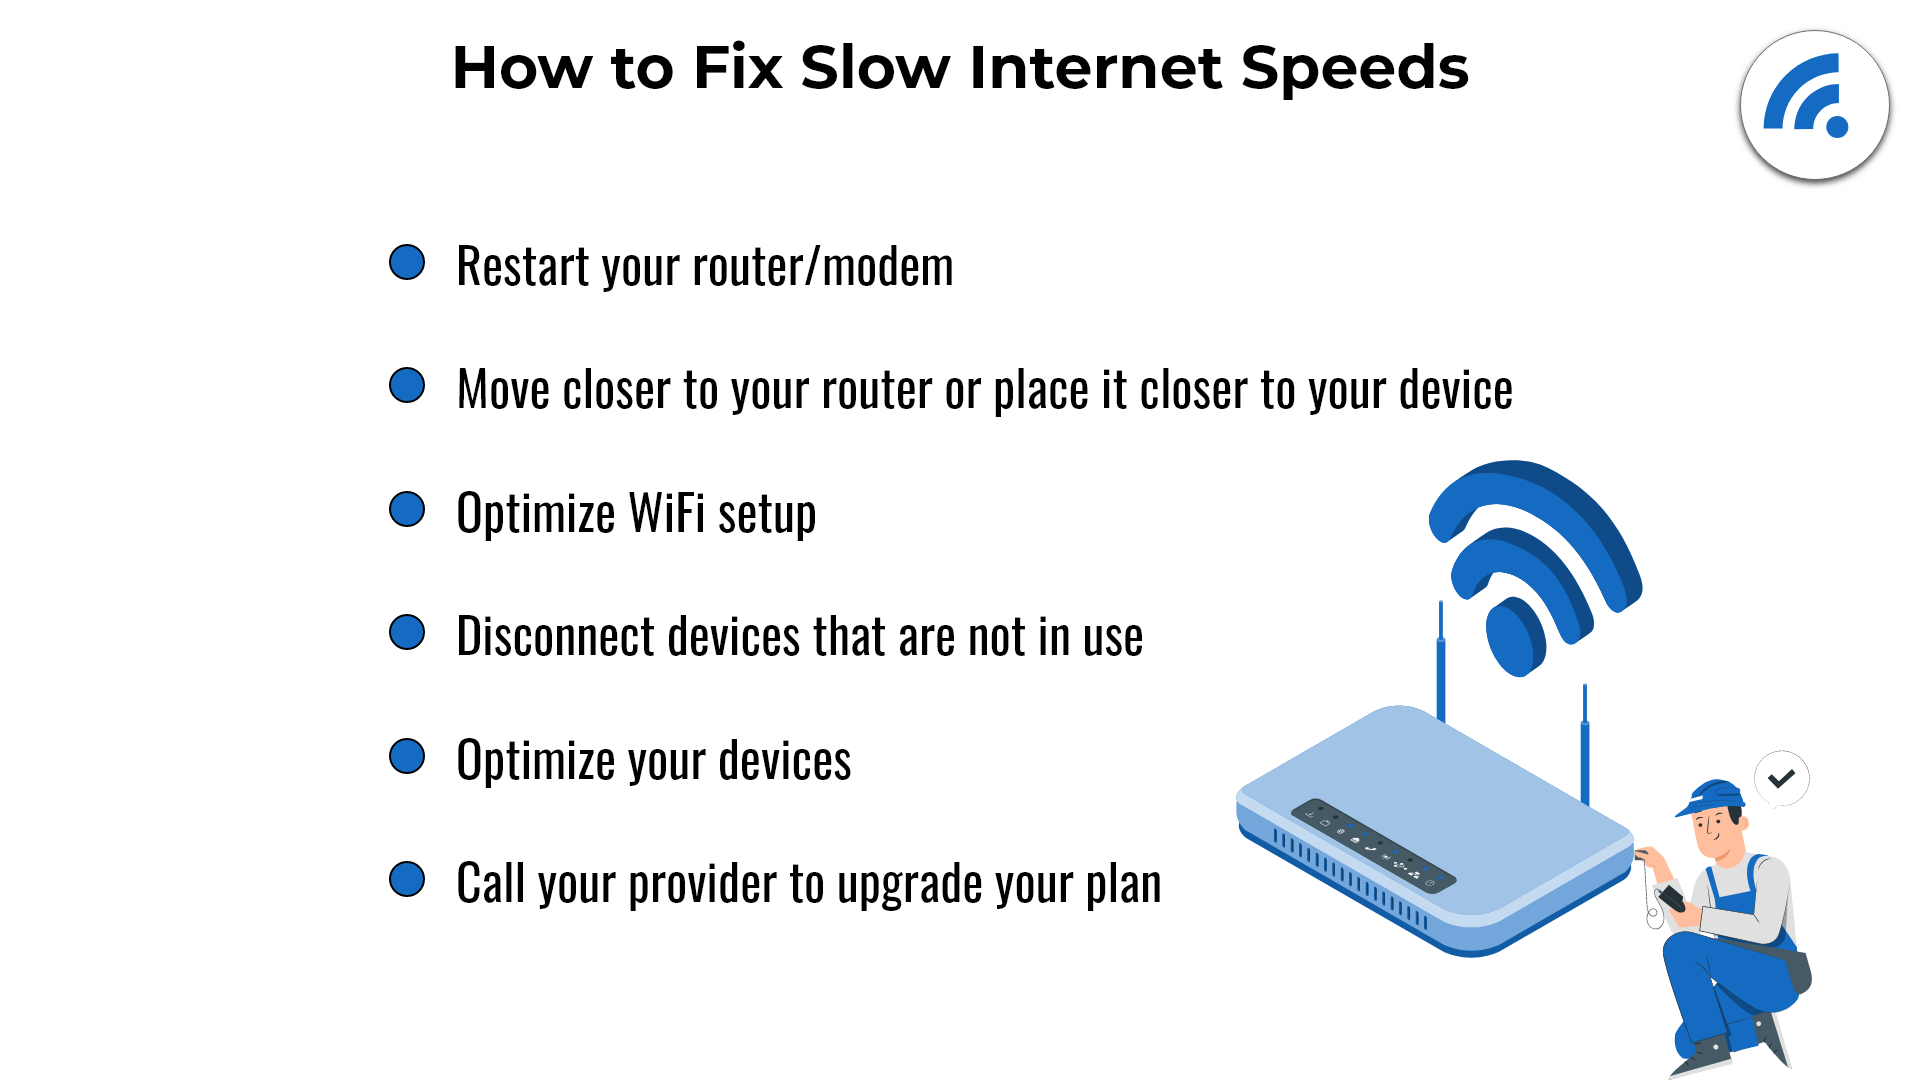 The Ultimate Guide on How to Fix Slow Internet Speed - BroadbandSearch